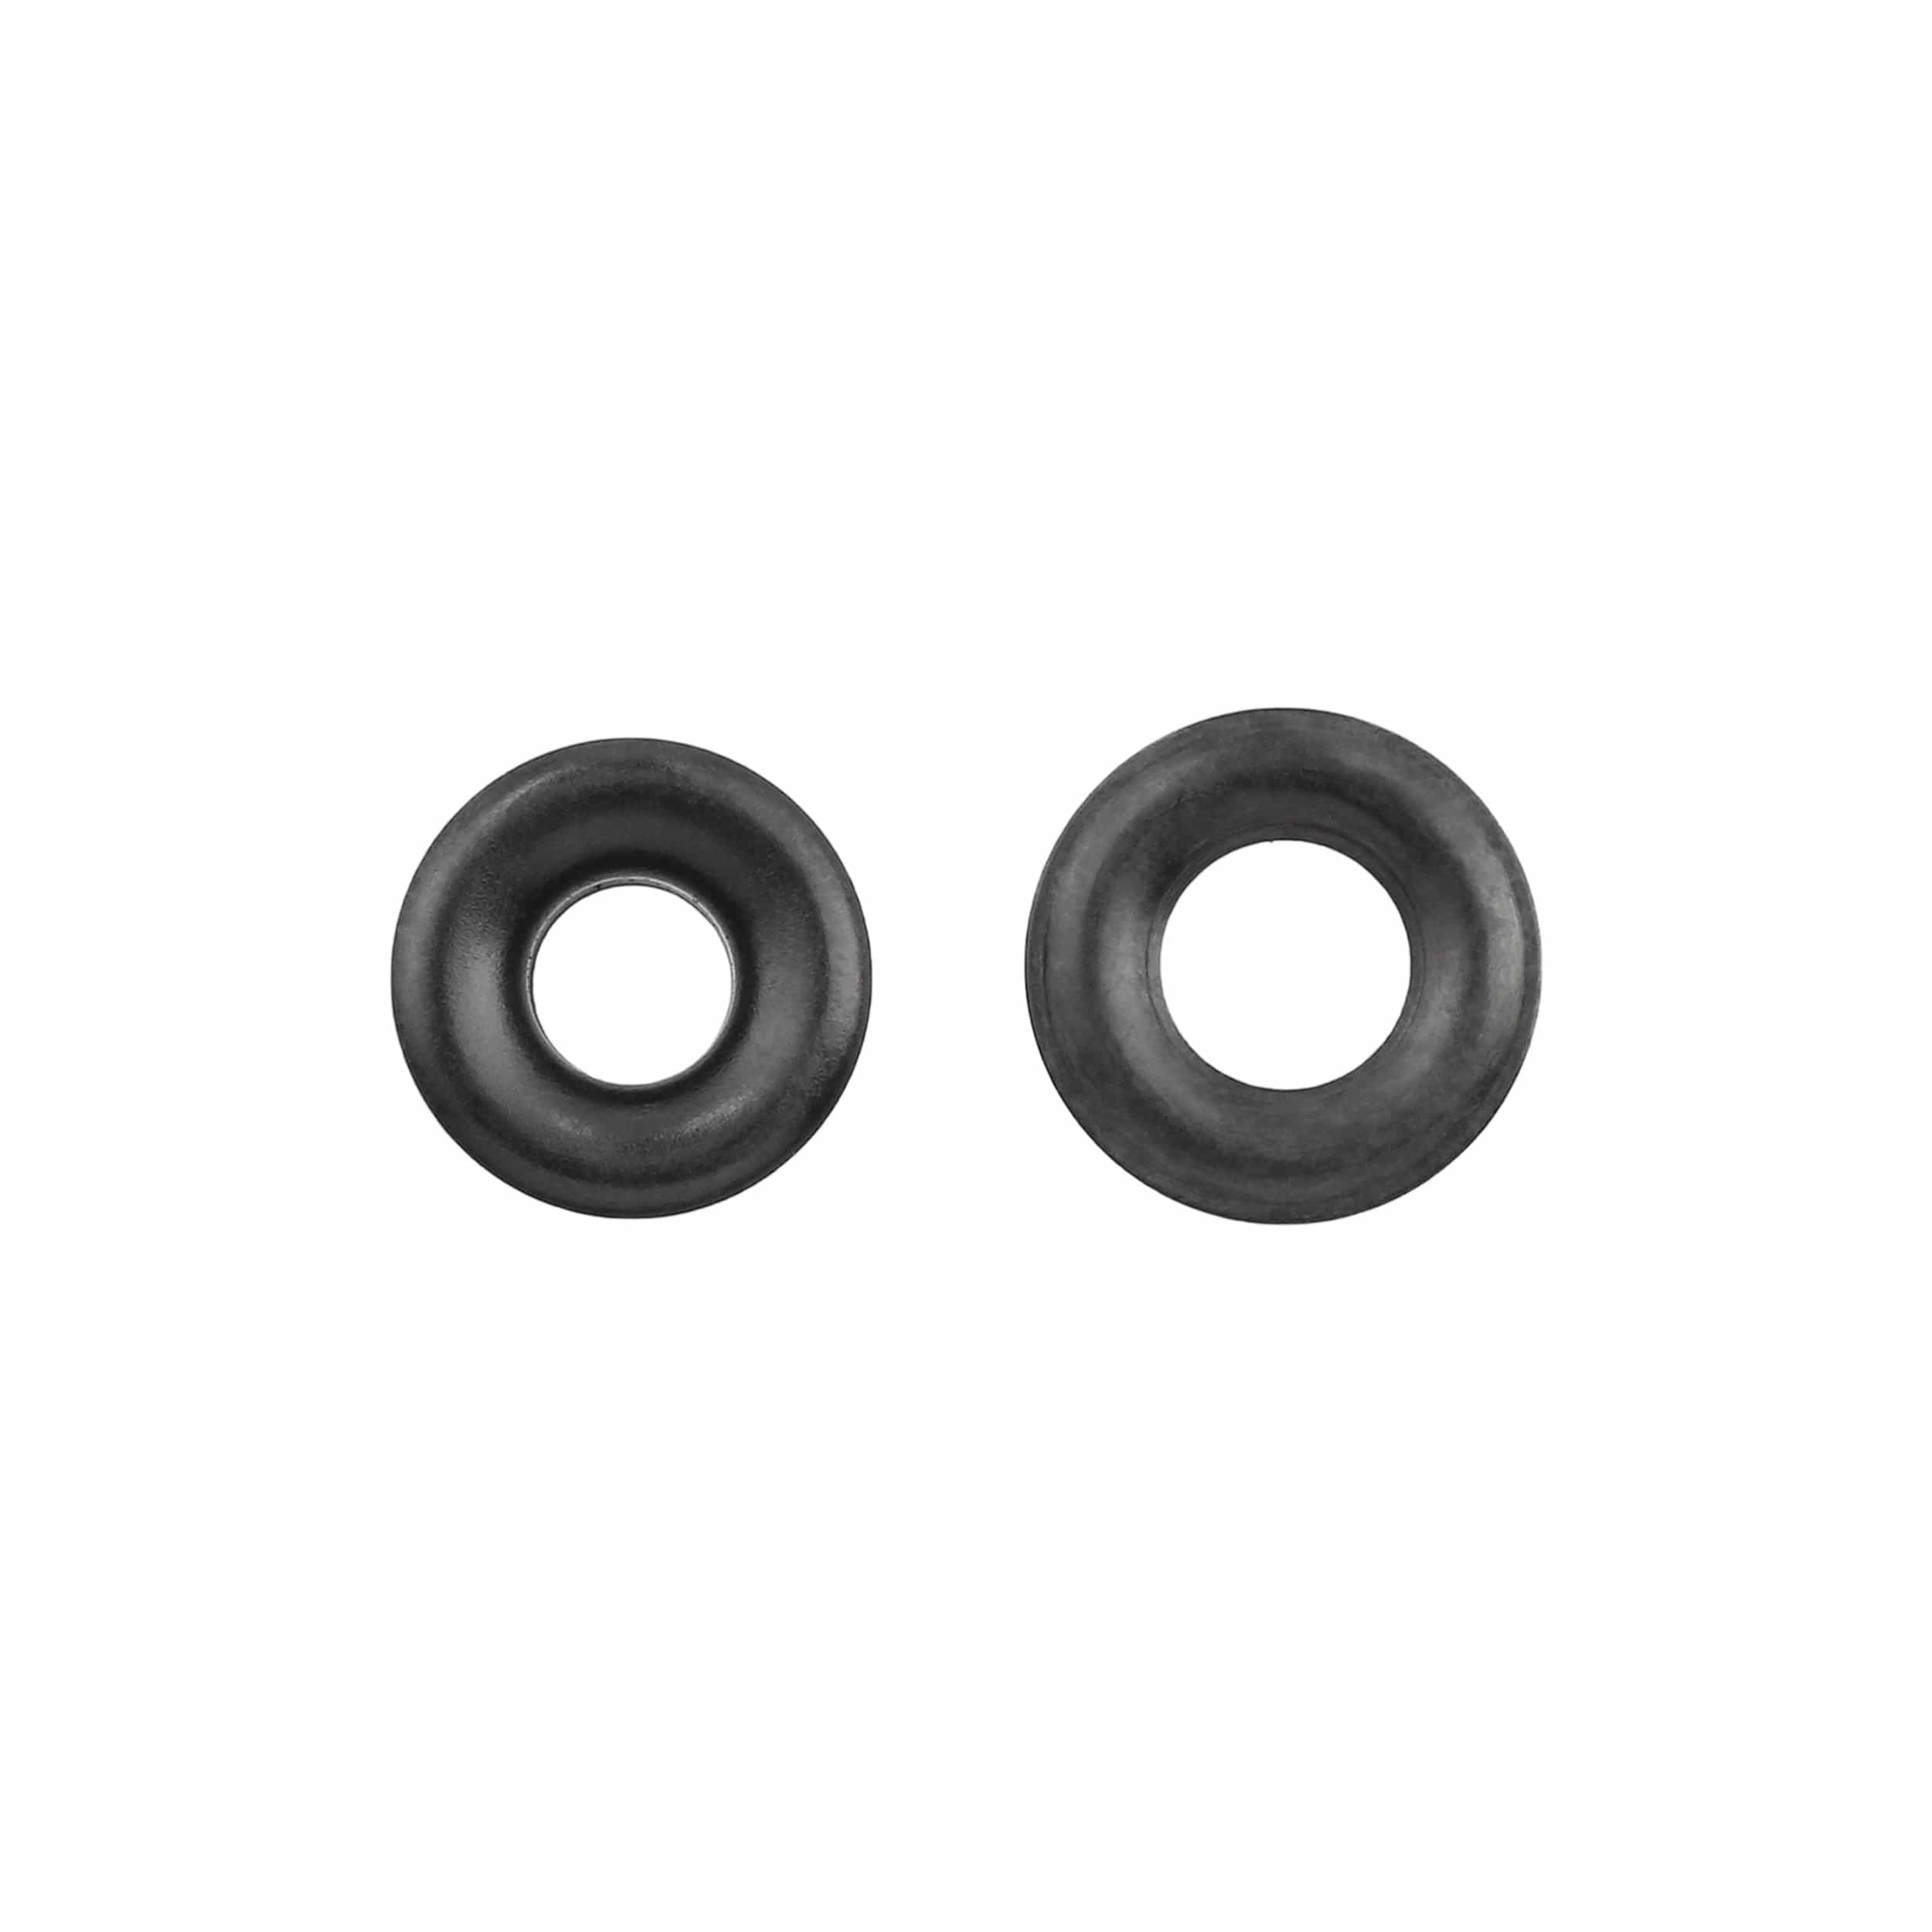 Ohio Travel Bag Fasteners #00 Black, Grommet with Washer, Solid Brass - 24 pk, #GROM-00-BLK GROM-00-BLK